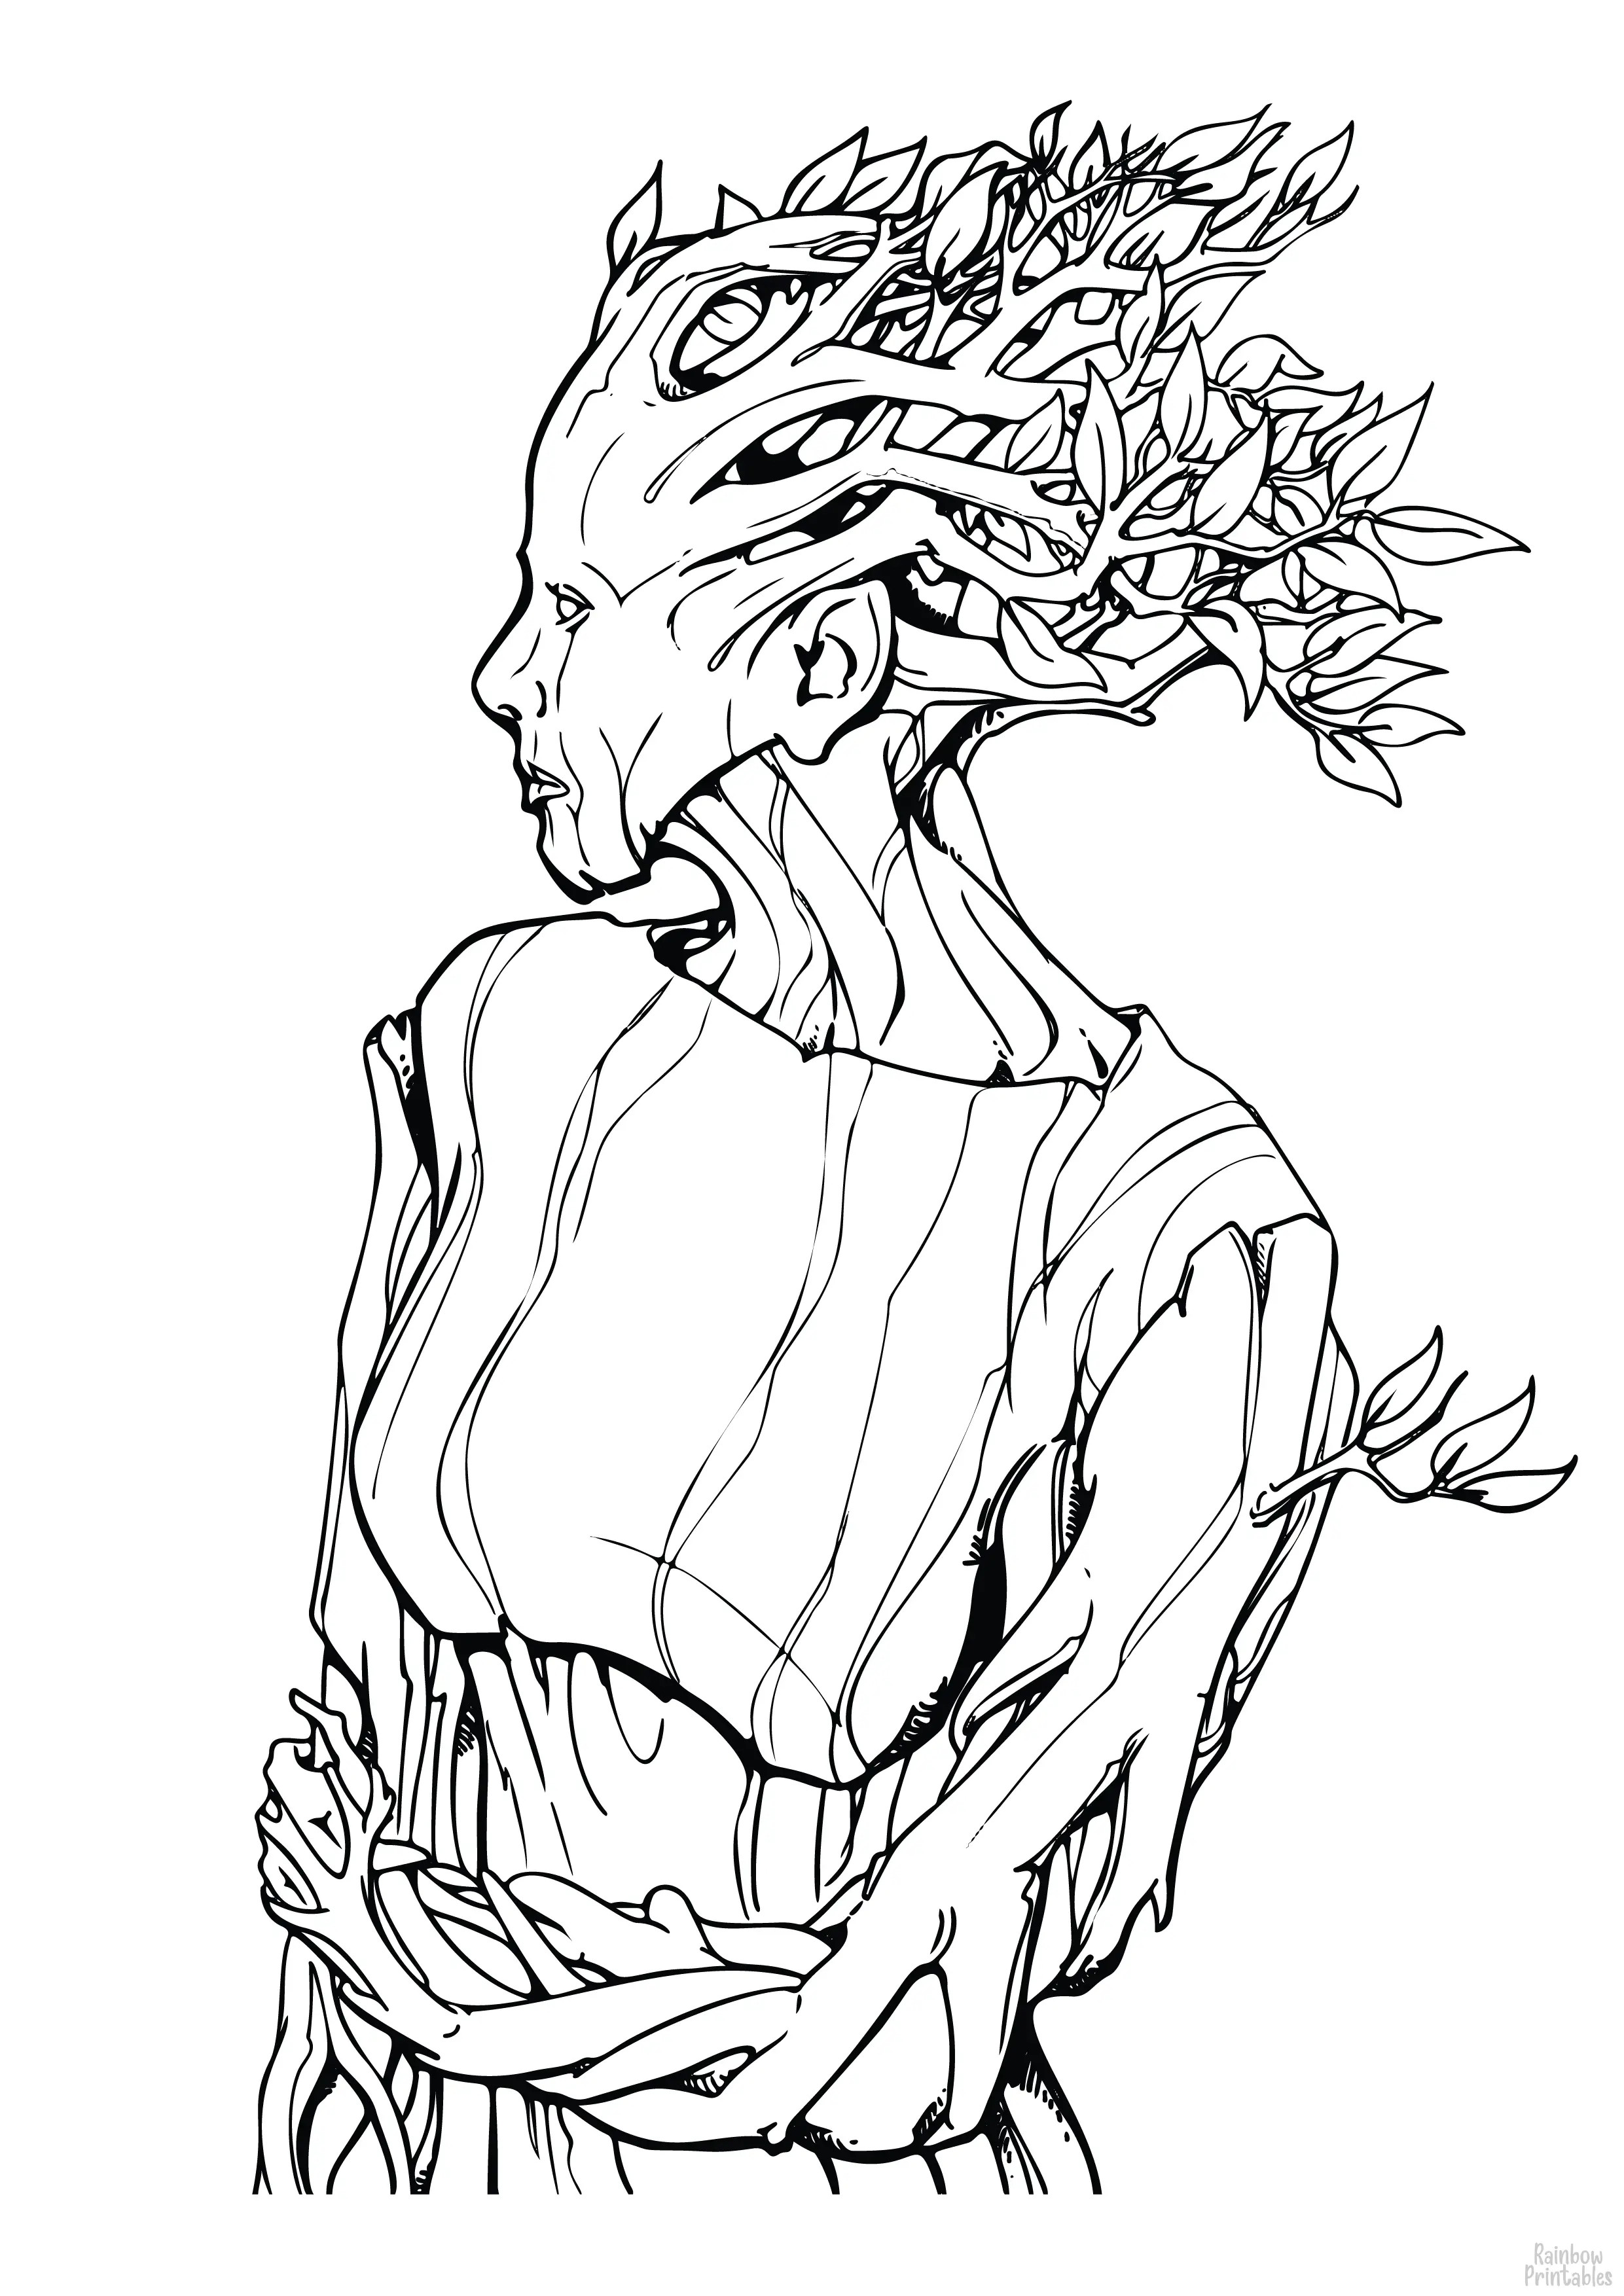 HALLOWEEN TREE LADY FANTASY Monster LADY GROOT Line Art Drawing Set Free Activity Coloring Pages for Kids